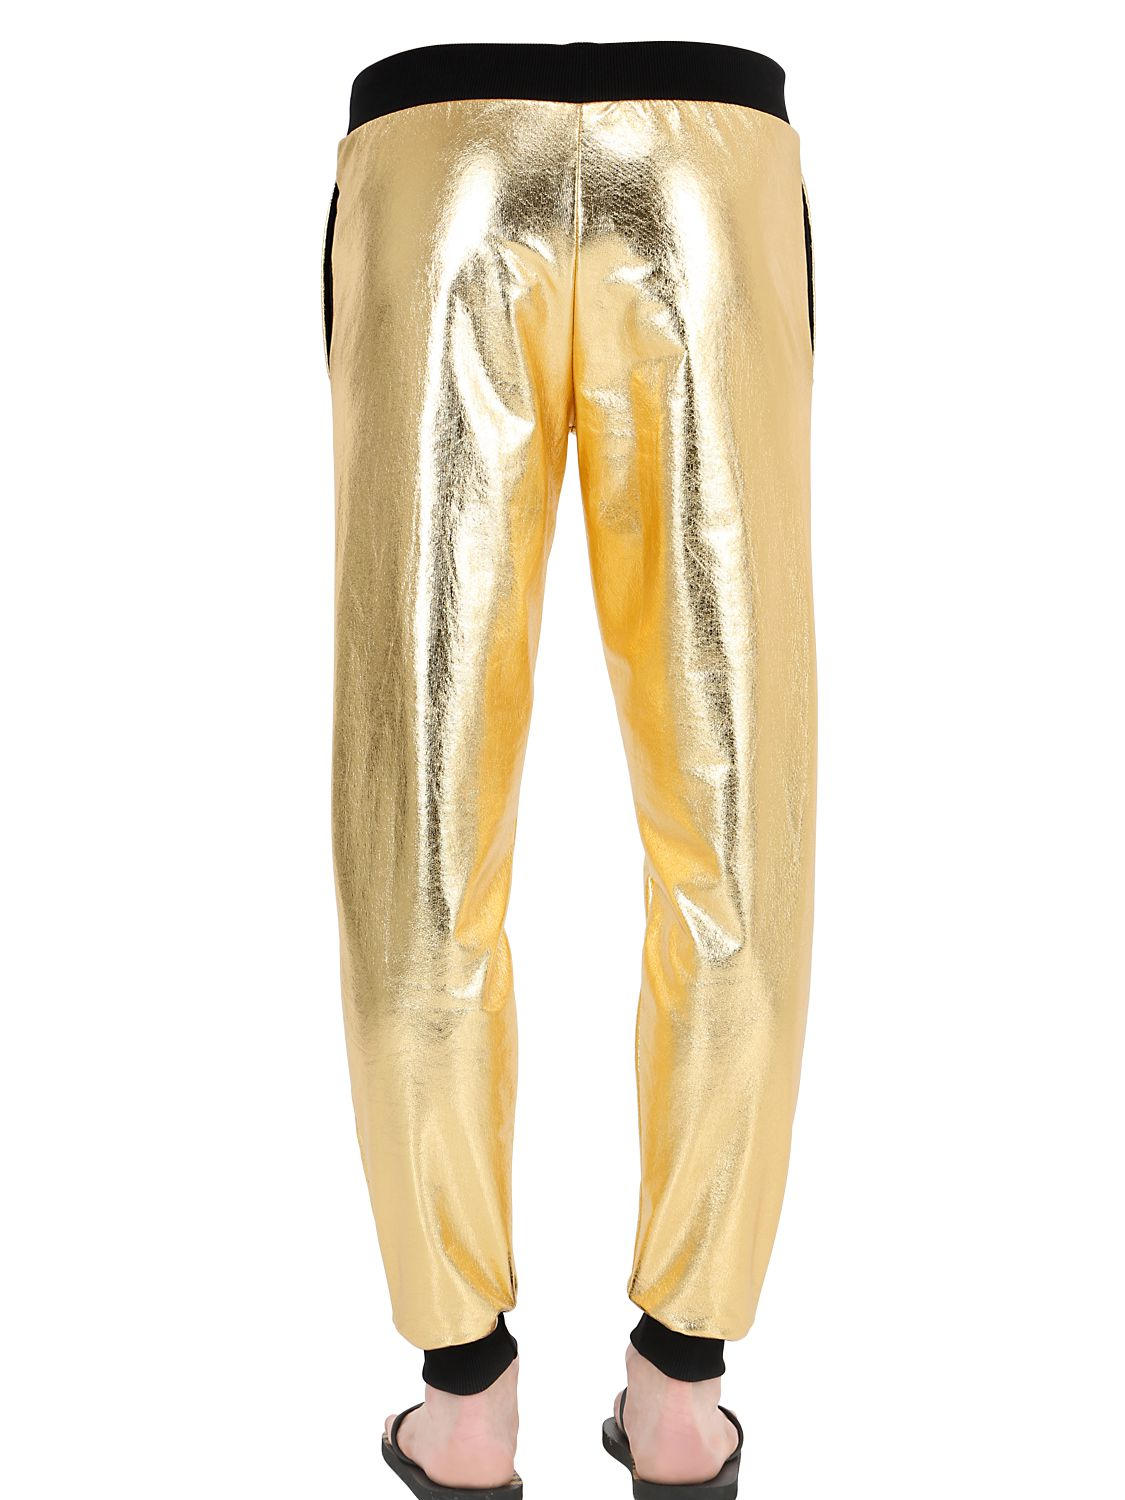 Lyst - Moschino Gold Cotton Jogging Pants in Metallic